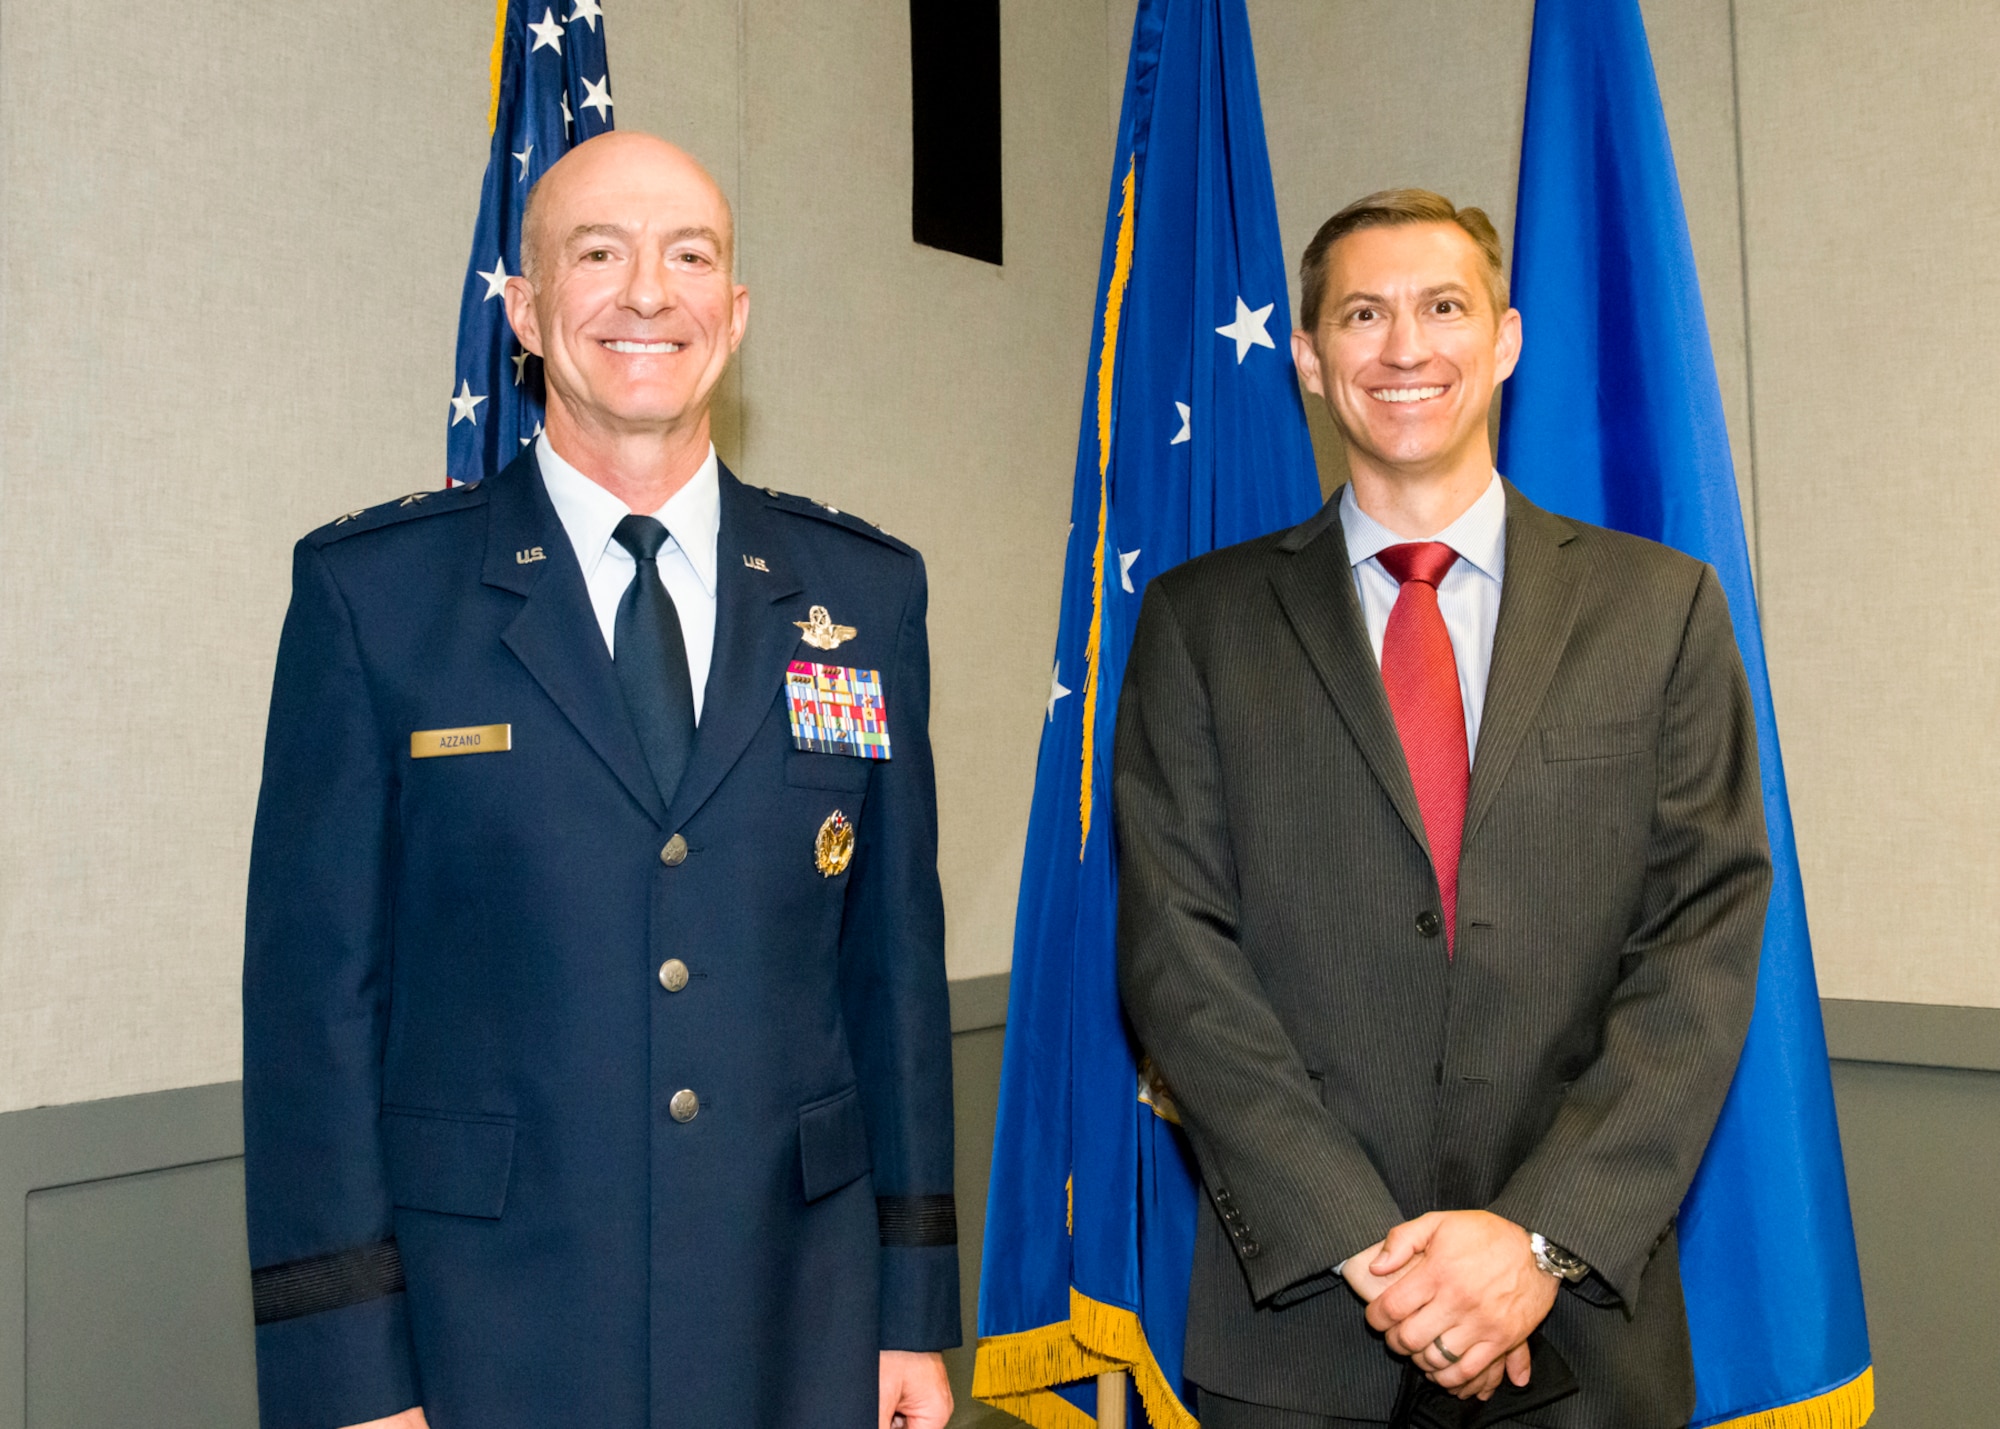 Air Force Test Center Commander, Maj. Gen. Christopher Azzano, stands next to Christopher Klug, the new Multi-Domain Test Force Detachment 1 director.